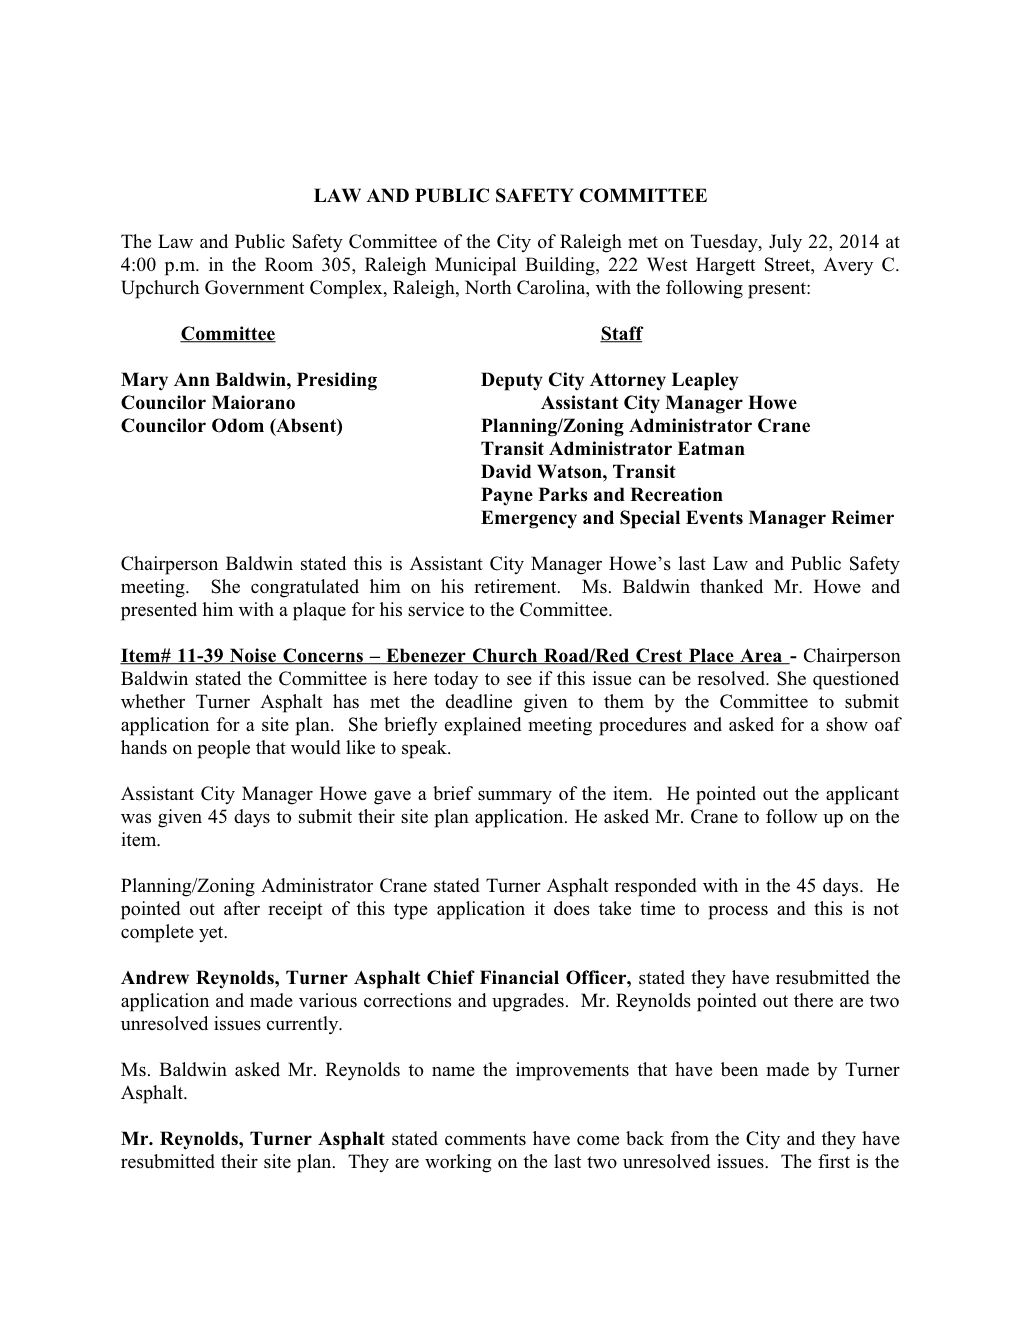 Law and Public Safety Committee Minutes - 07/22/2014